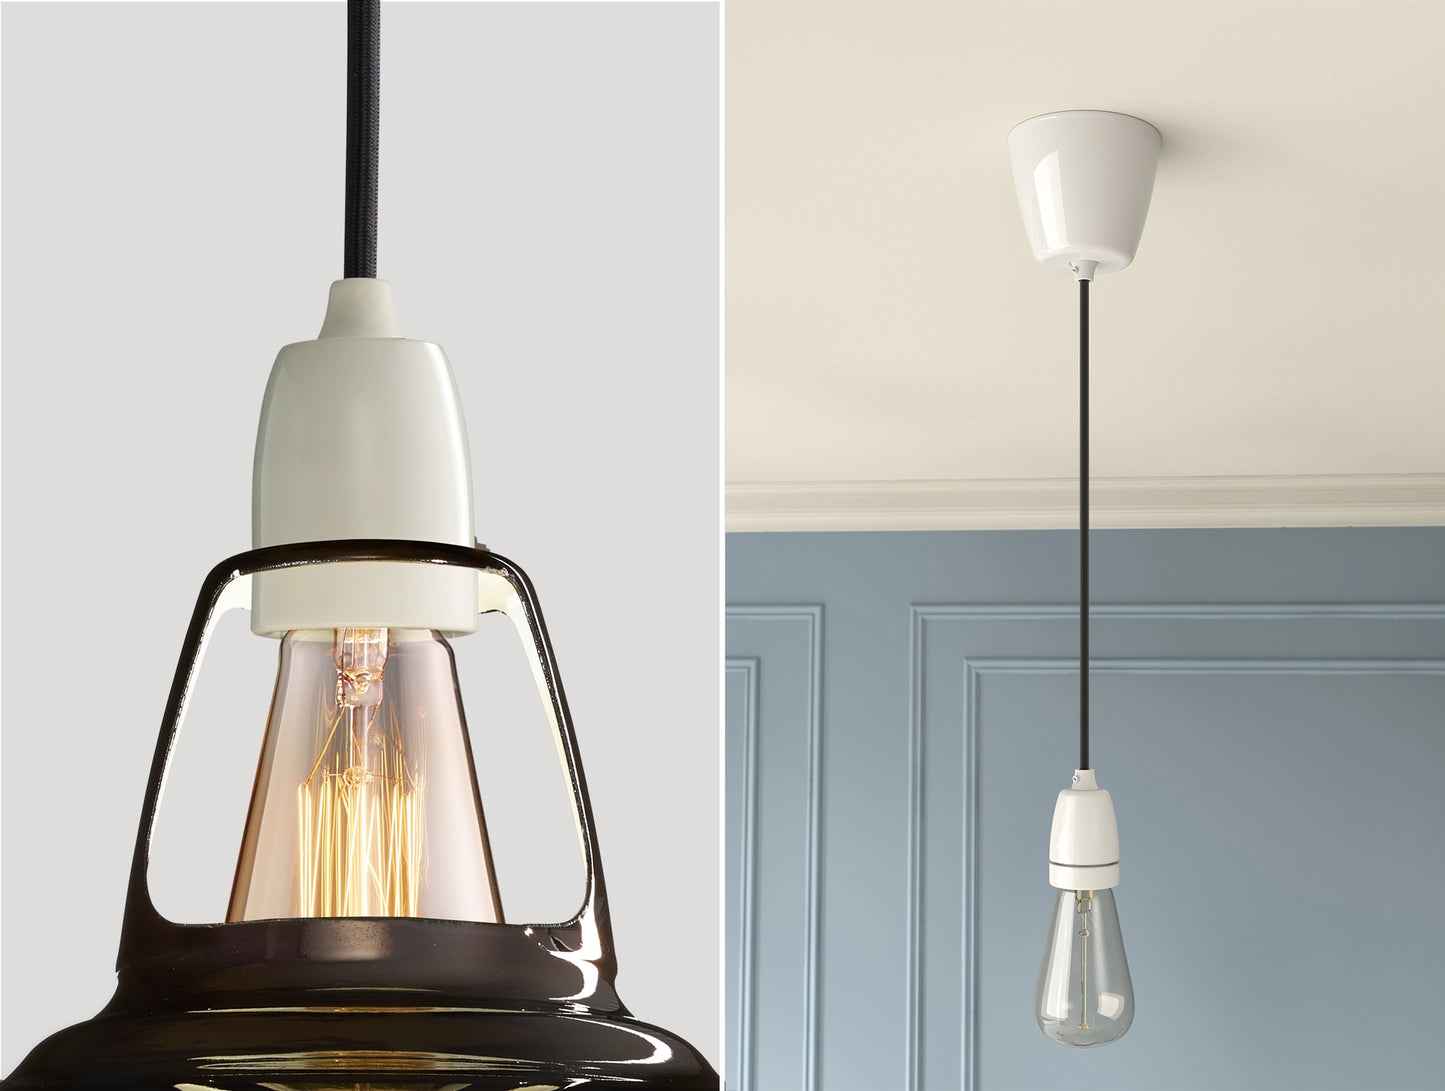 Close up of an E27 Porcelain suspension set on a Pewter lampshade on the left. On the right, an E27 Porcelain pendant set with a lightbulb is hanging from the ceiling